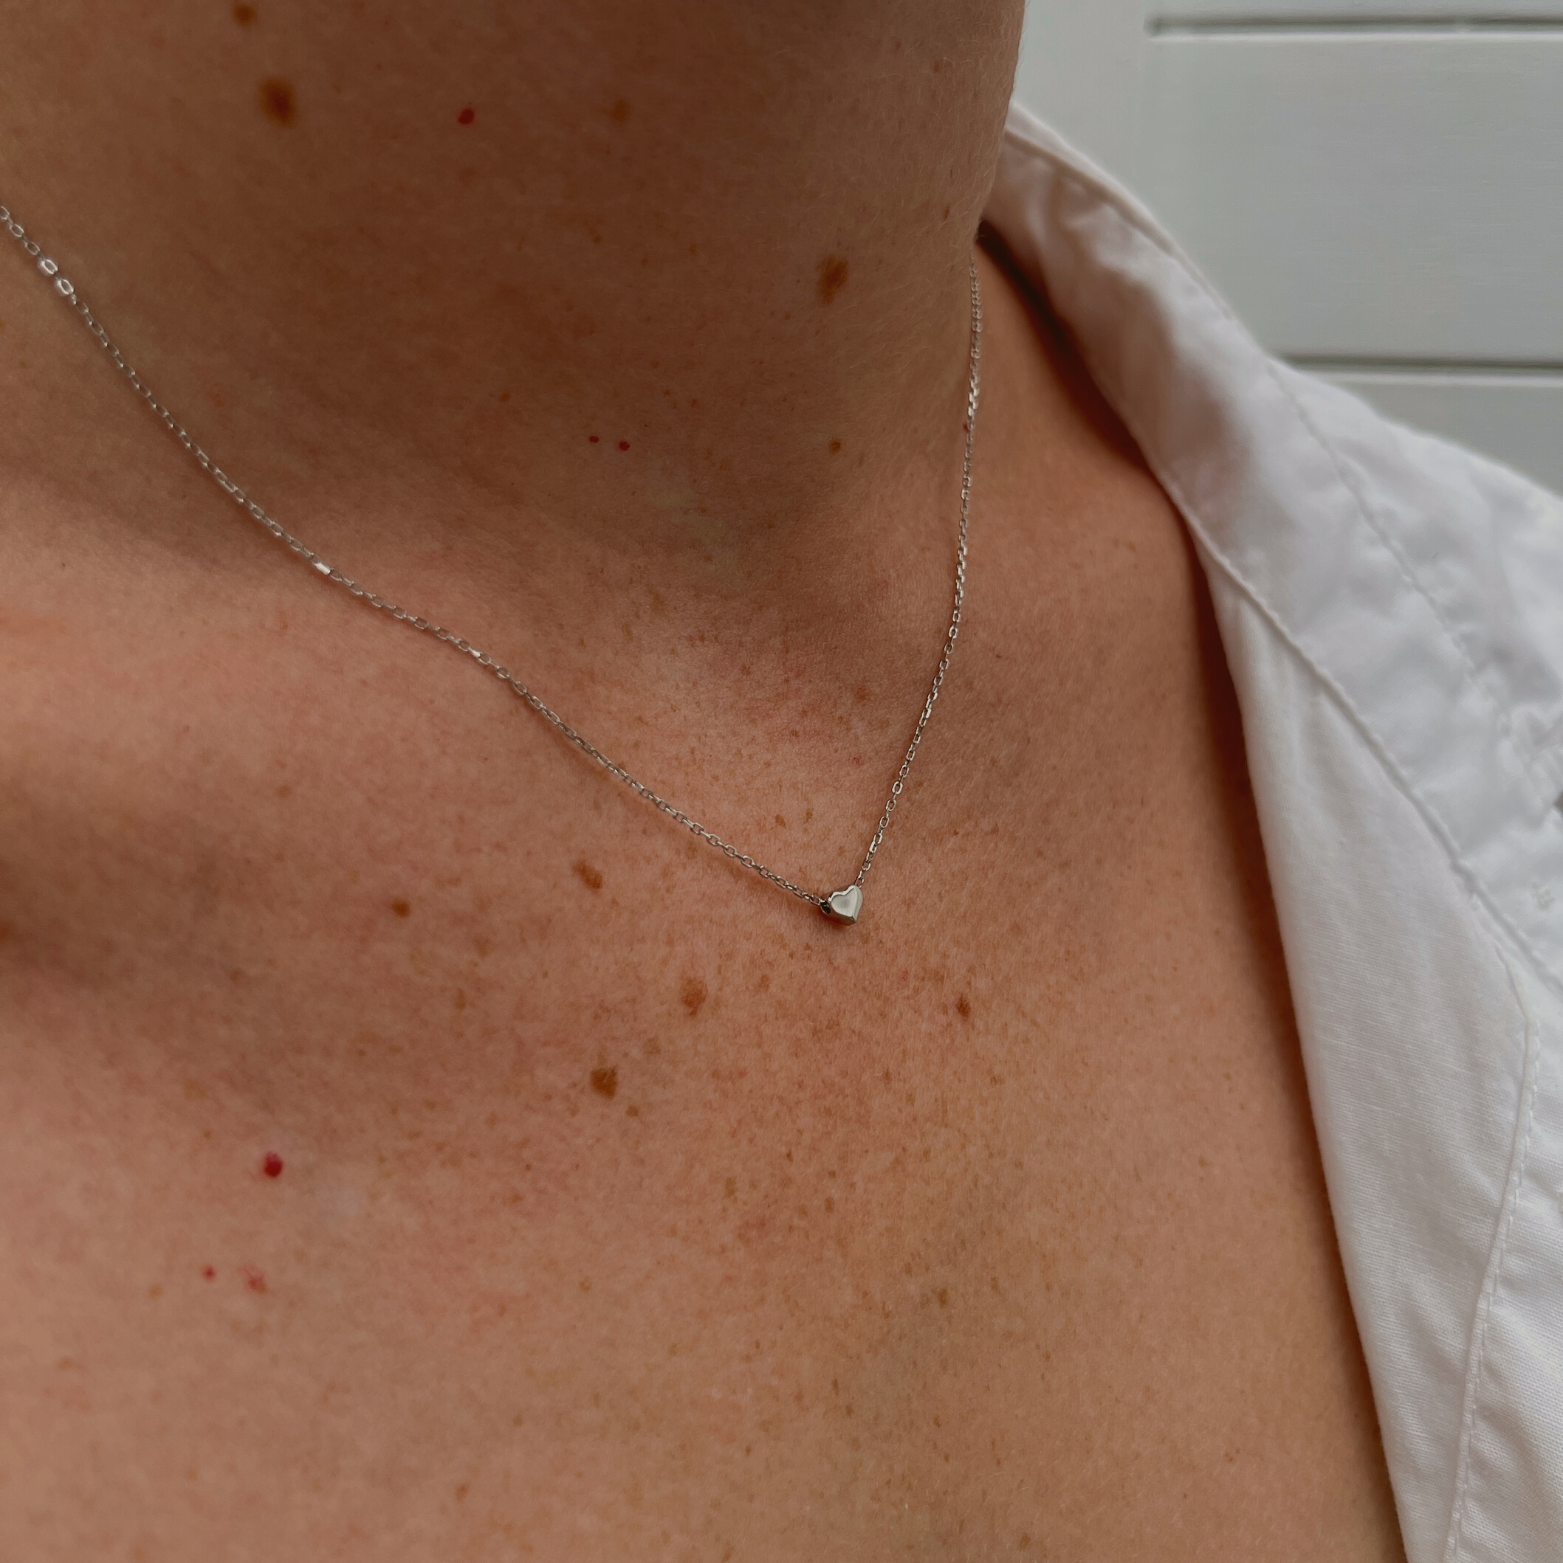 A woman adorned with the Amore sterling silver necklace featuring a heart pendant